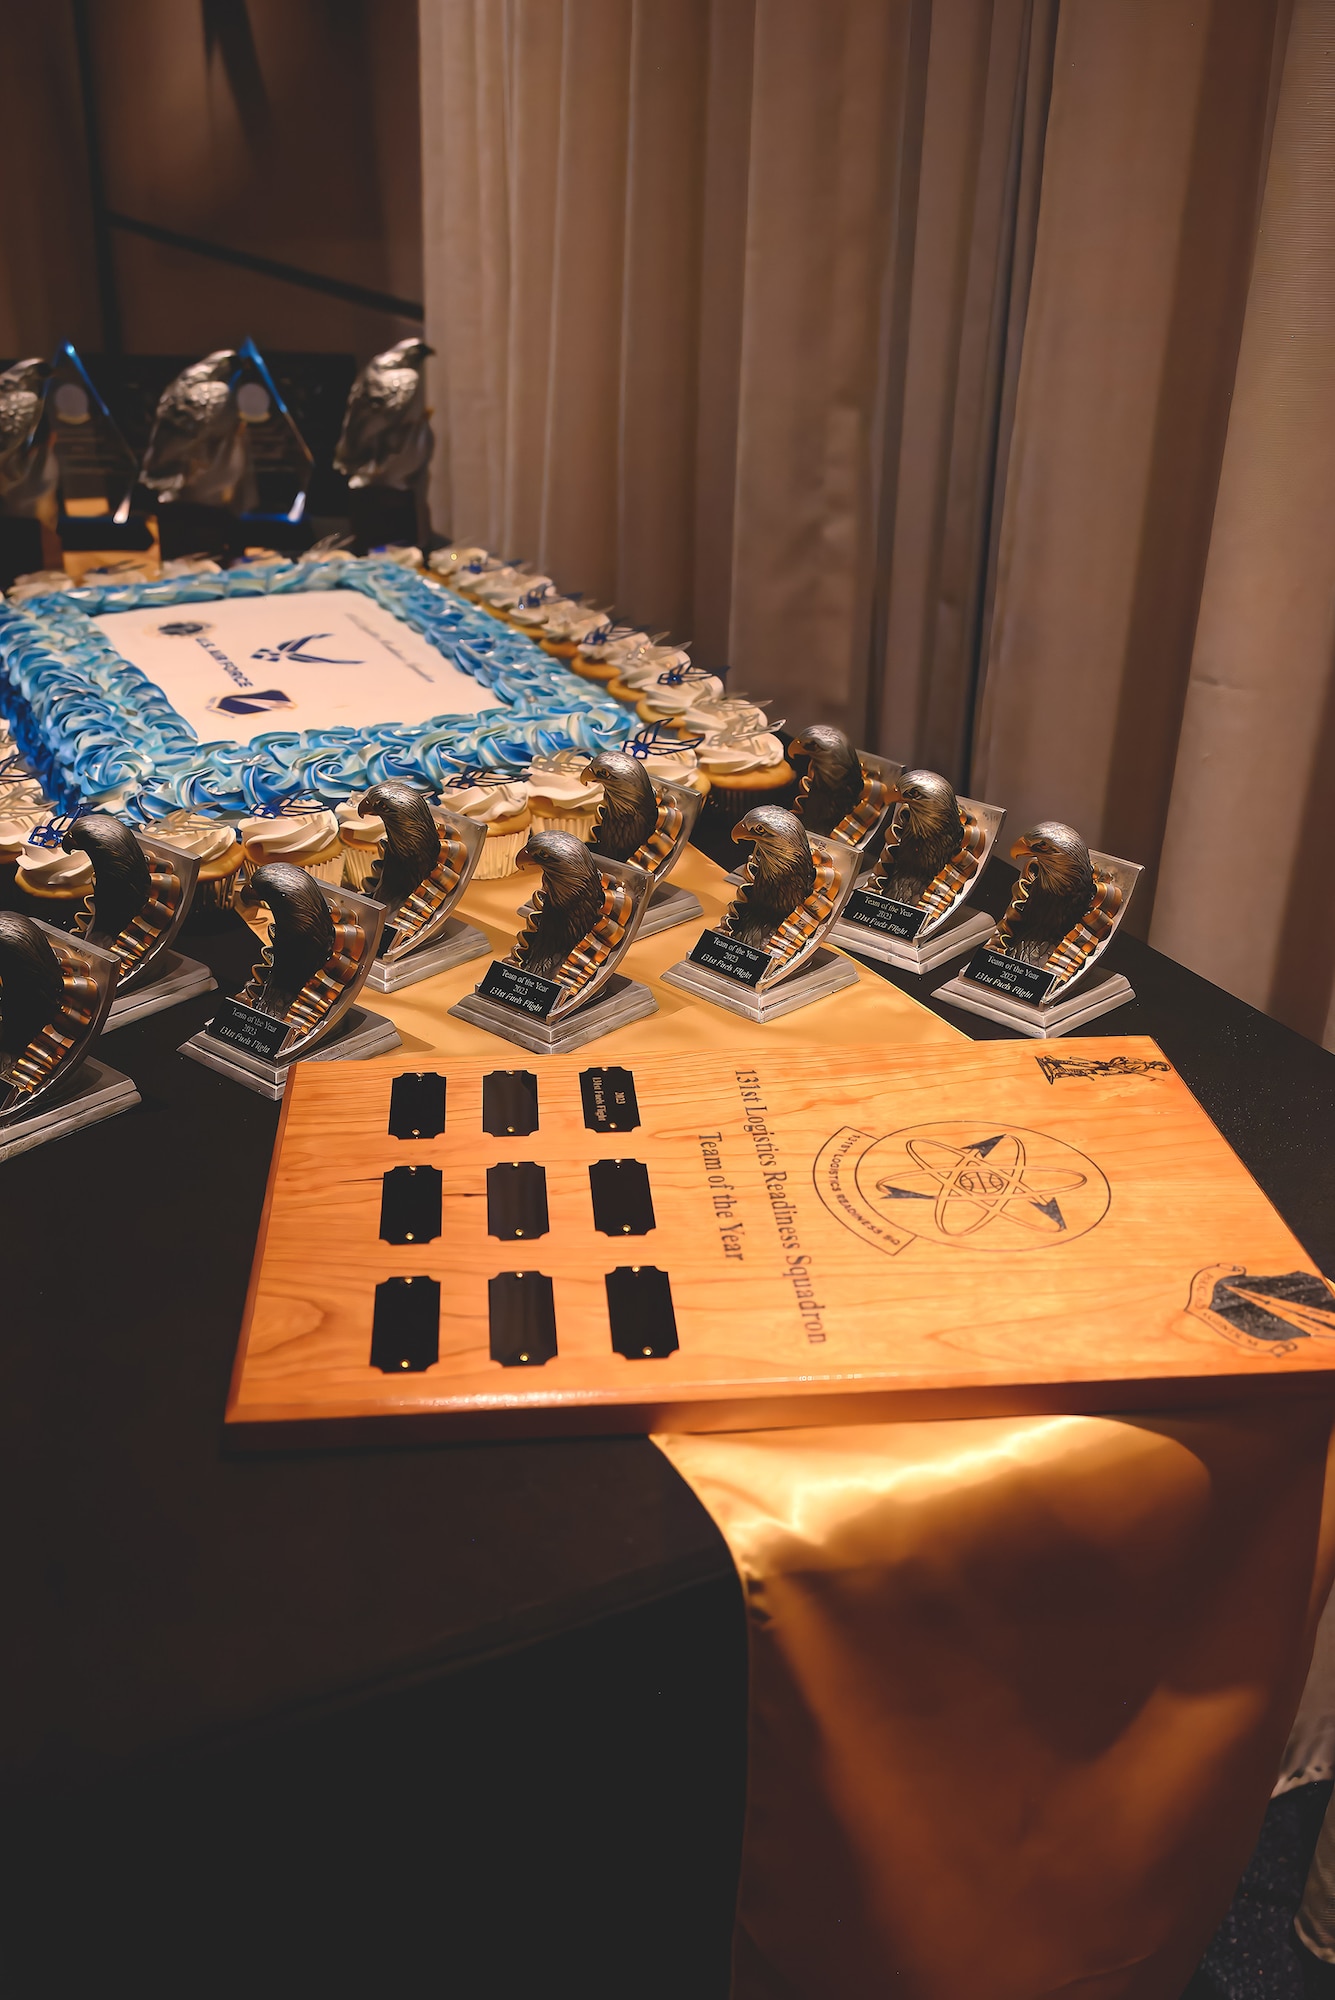 Various award plaques and trophies are displayed on a table along with a cake during an awards ceremony.